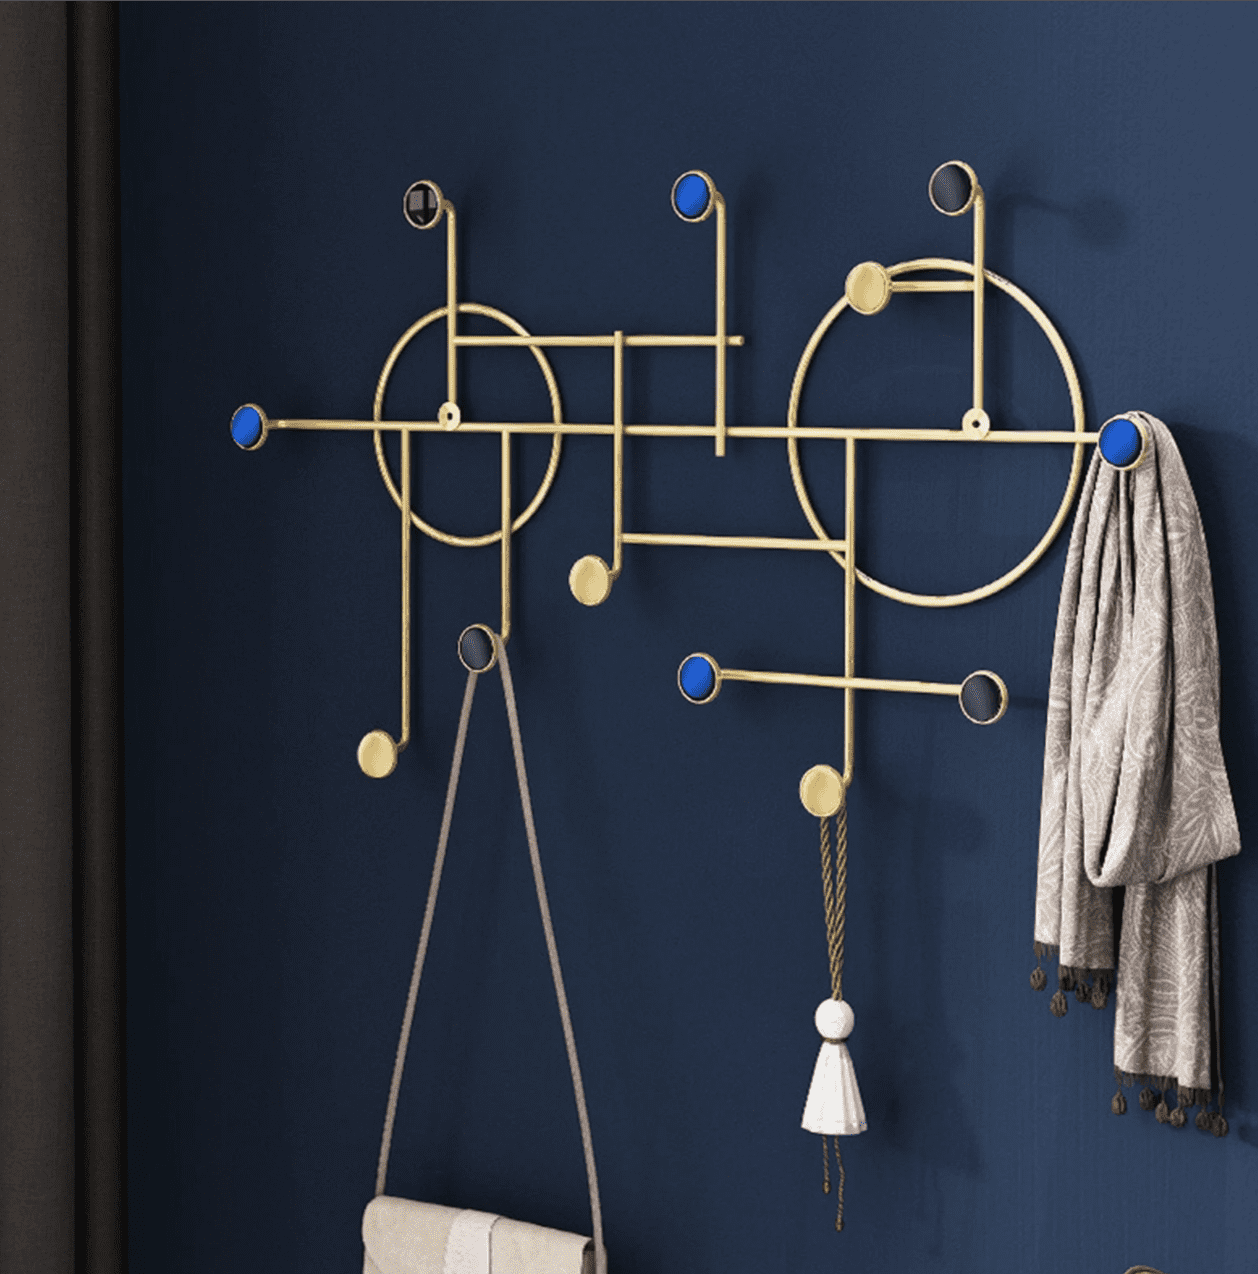 These Stylish Coat Racks Will Help Corral All Your Winter Must-Haves